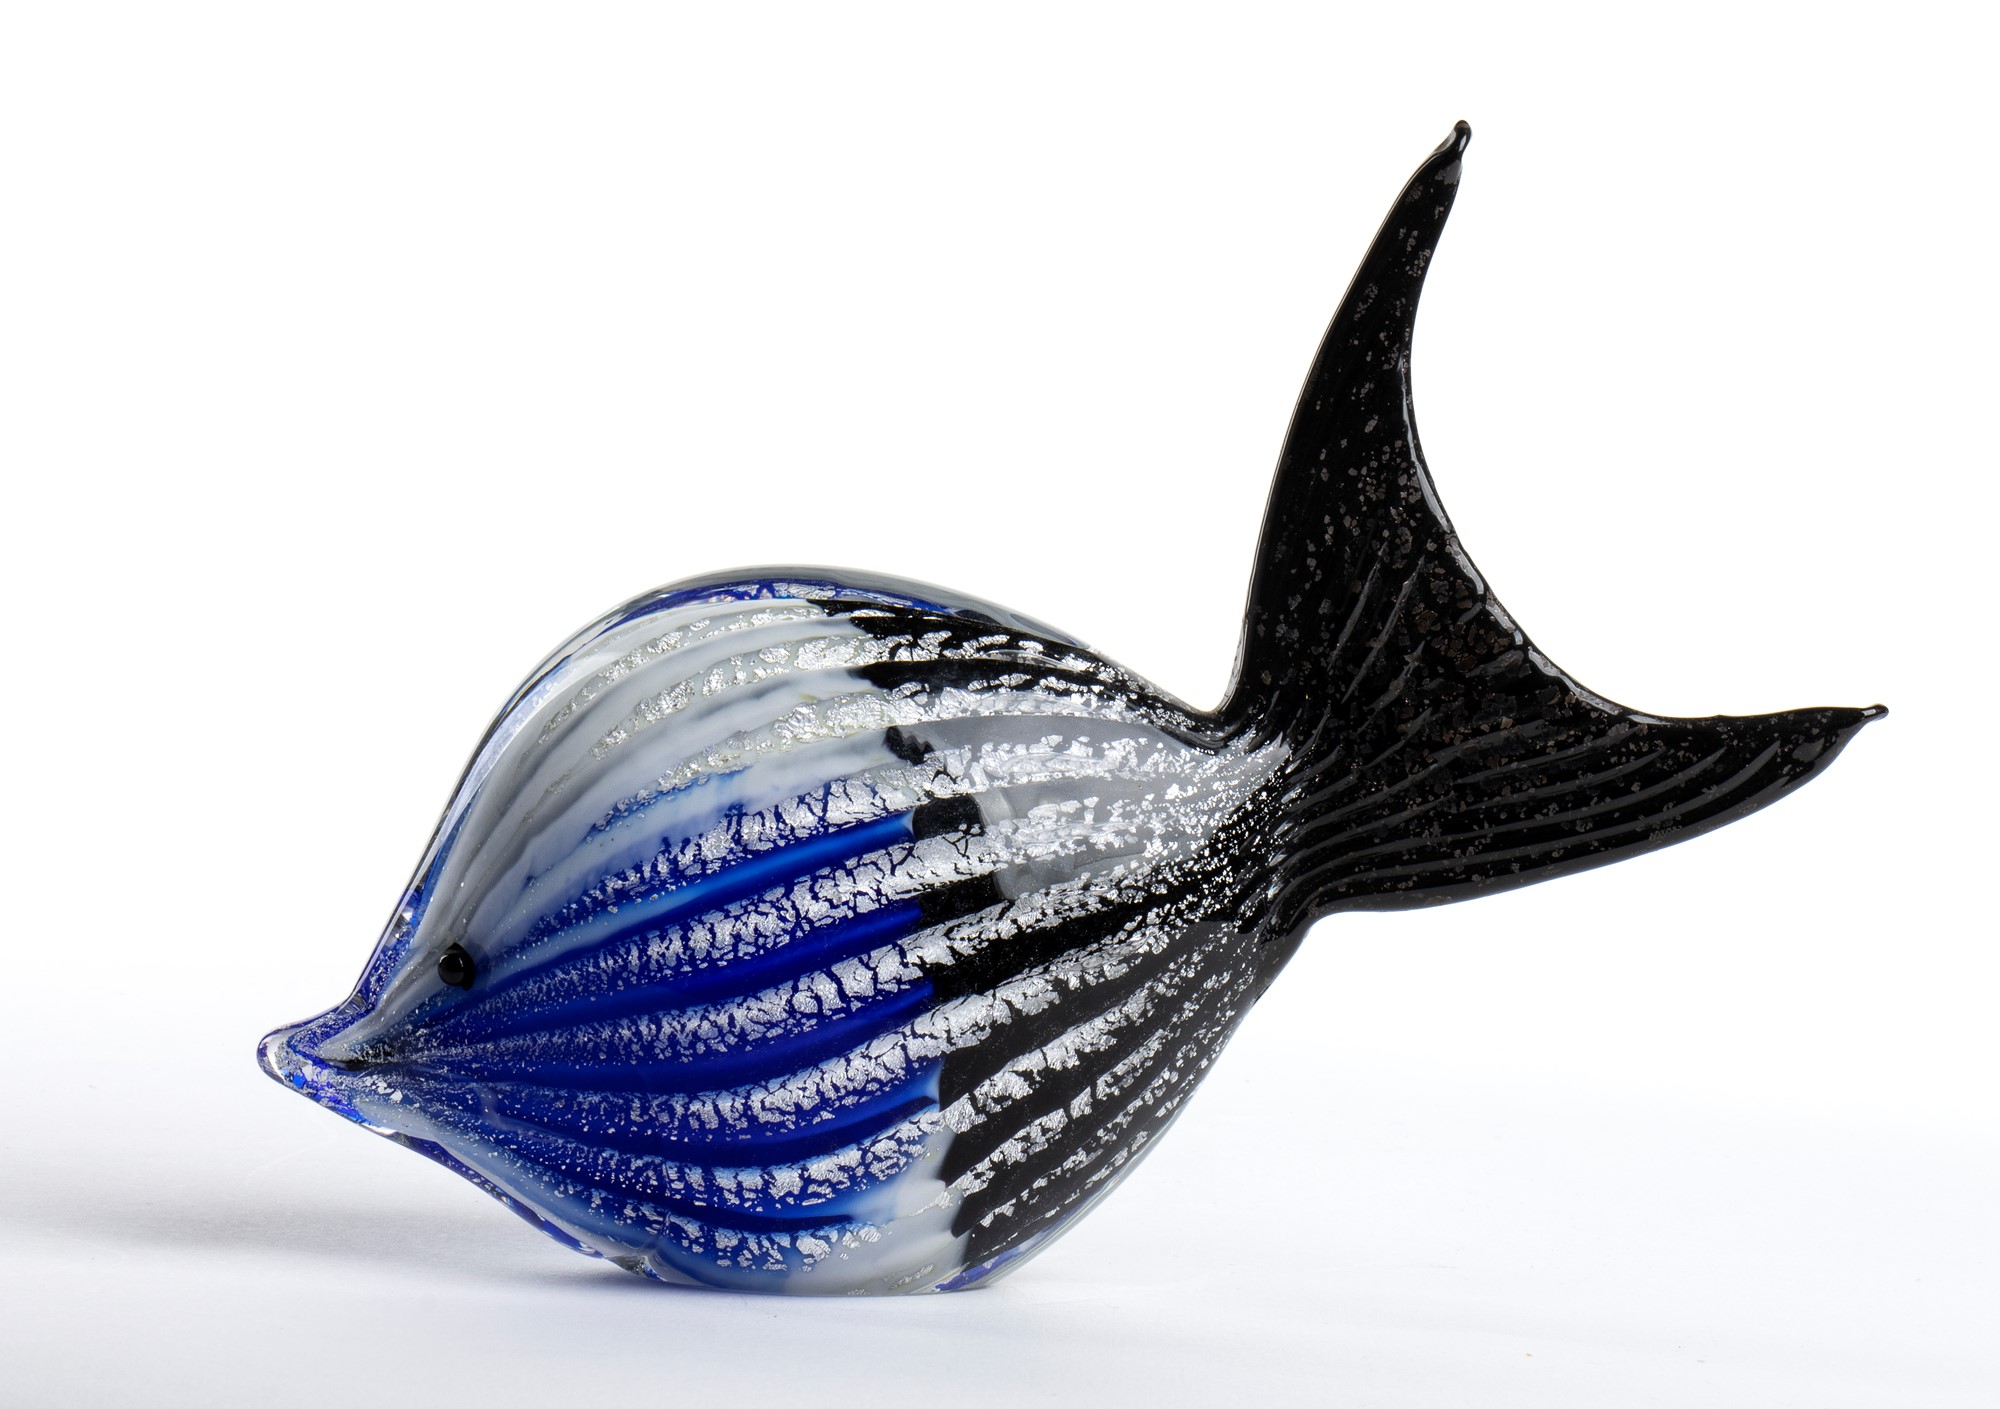 Small fish-shaped sculpture in Murano glass - Image 2 of 11